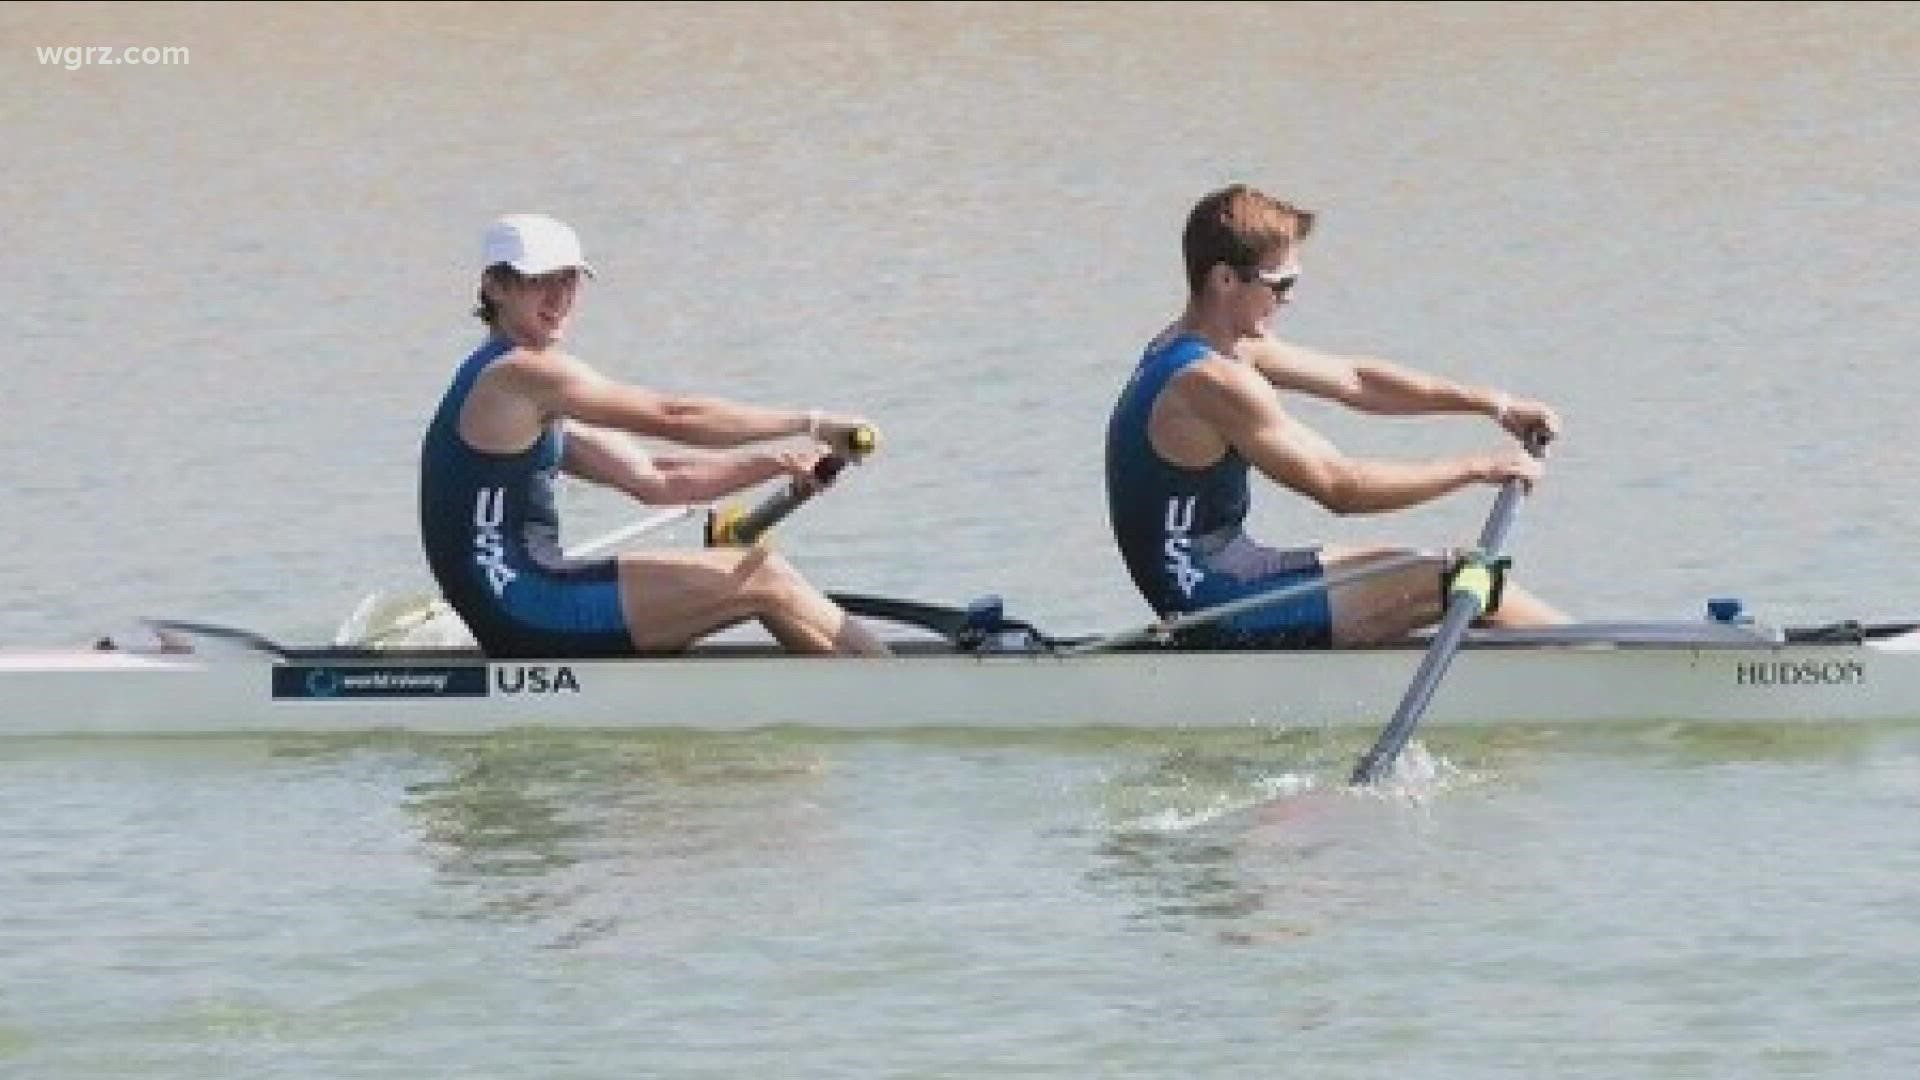 Two Buffalo rowers will have the opportunity of a lifetime to compete for team USA and win a world championship and need the support of their community to get there.